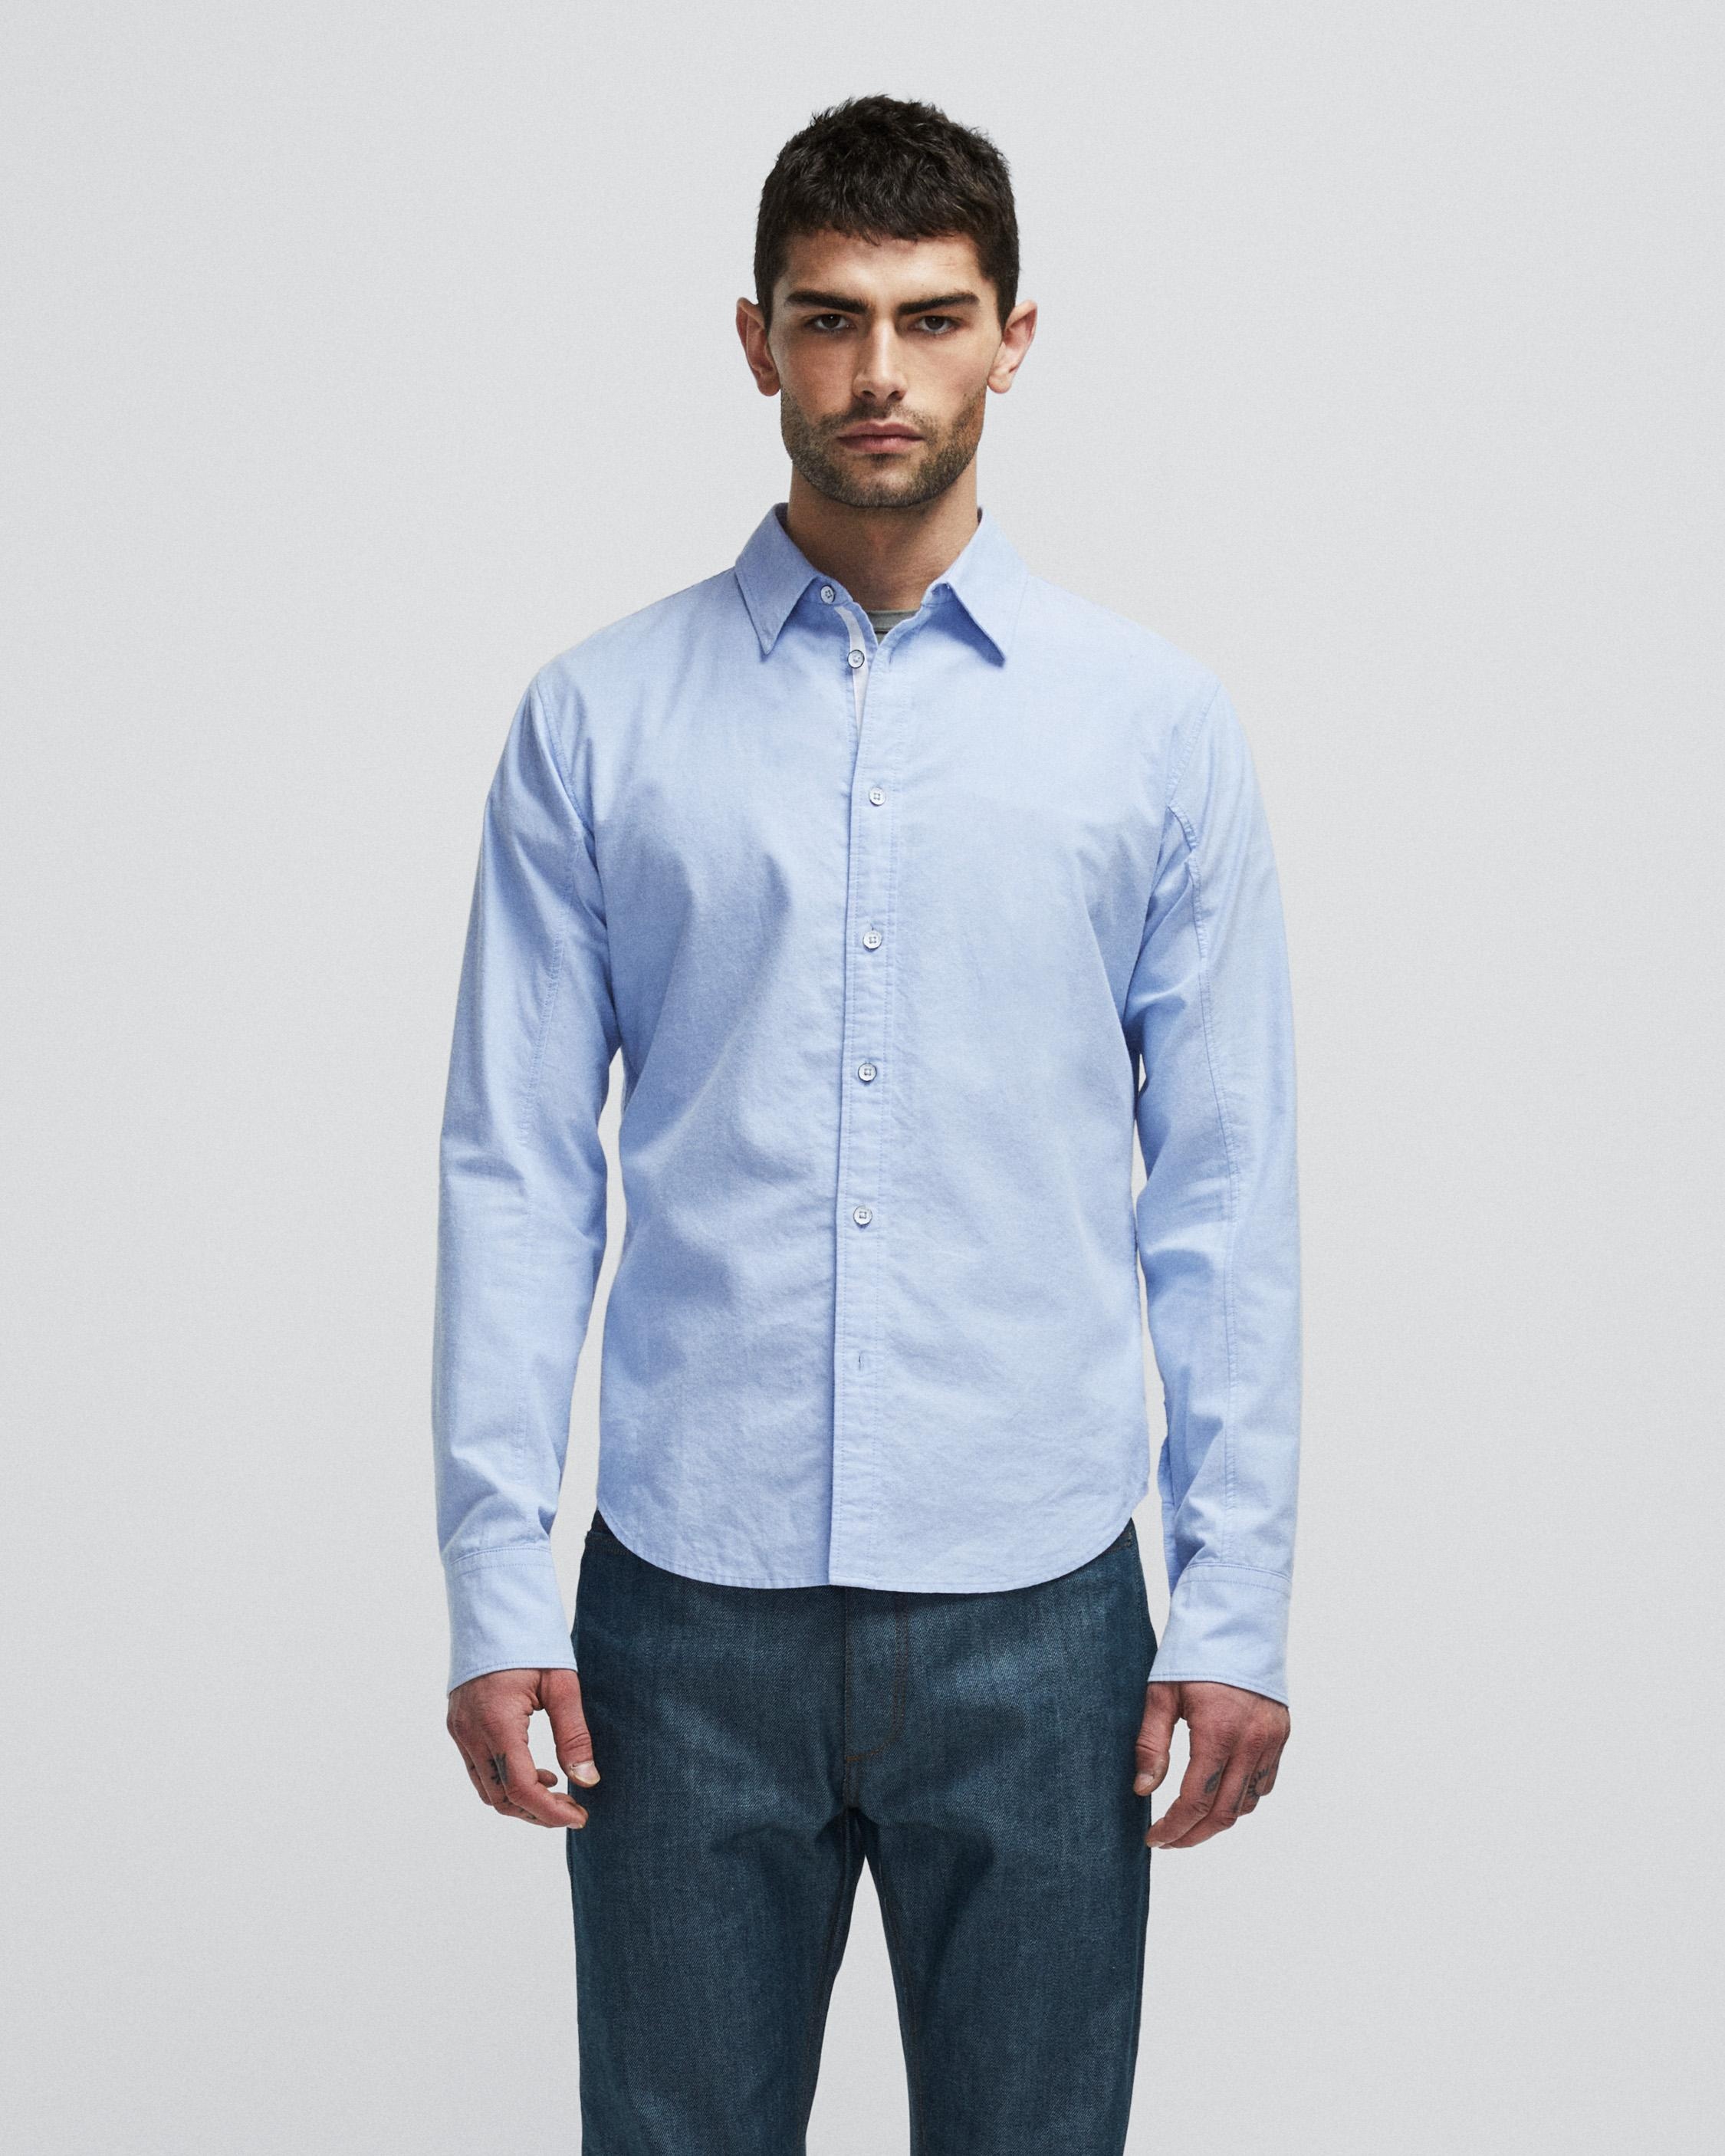 Fit 2 Engineered Cotton Oxford Shirt
Slim Fit Shirt - 3